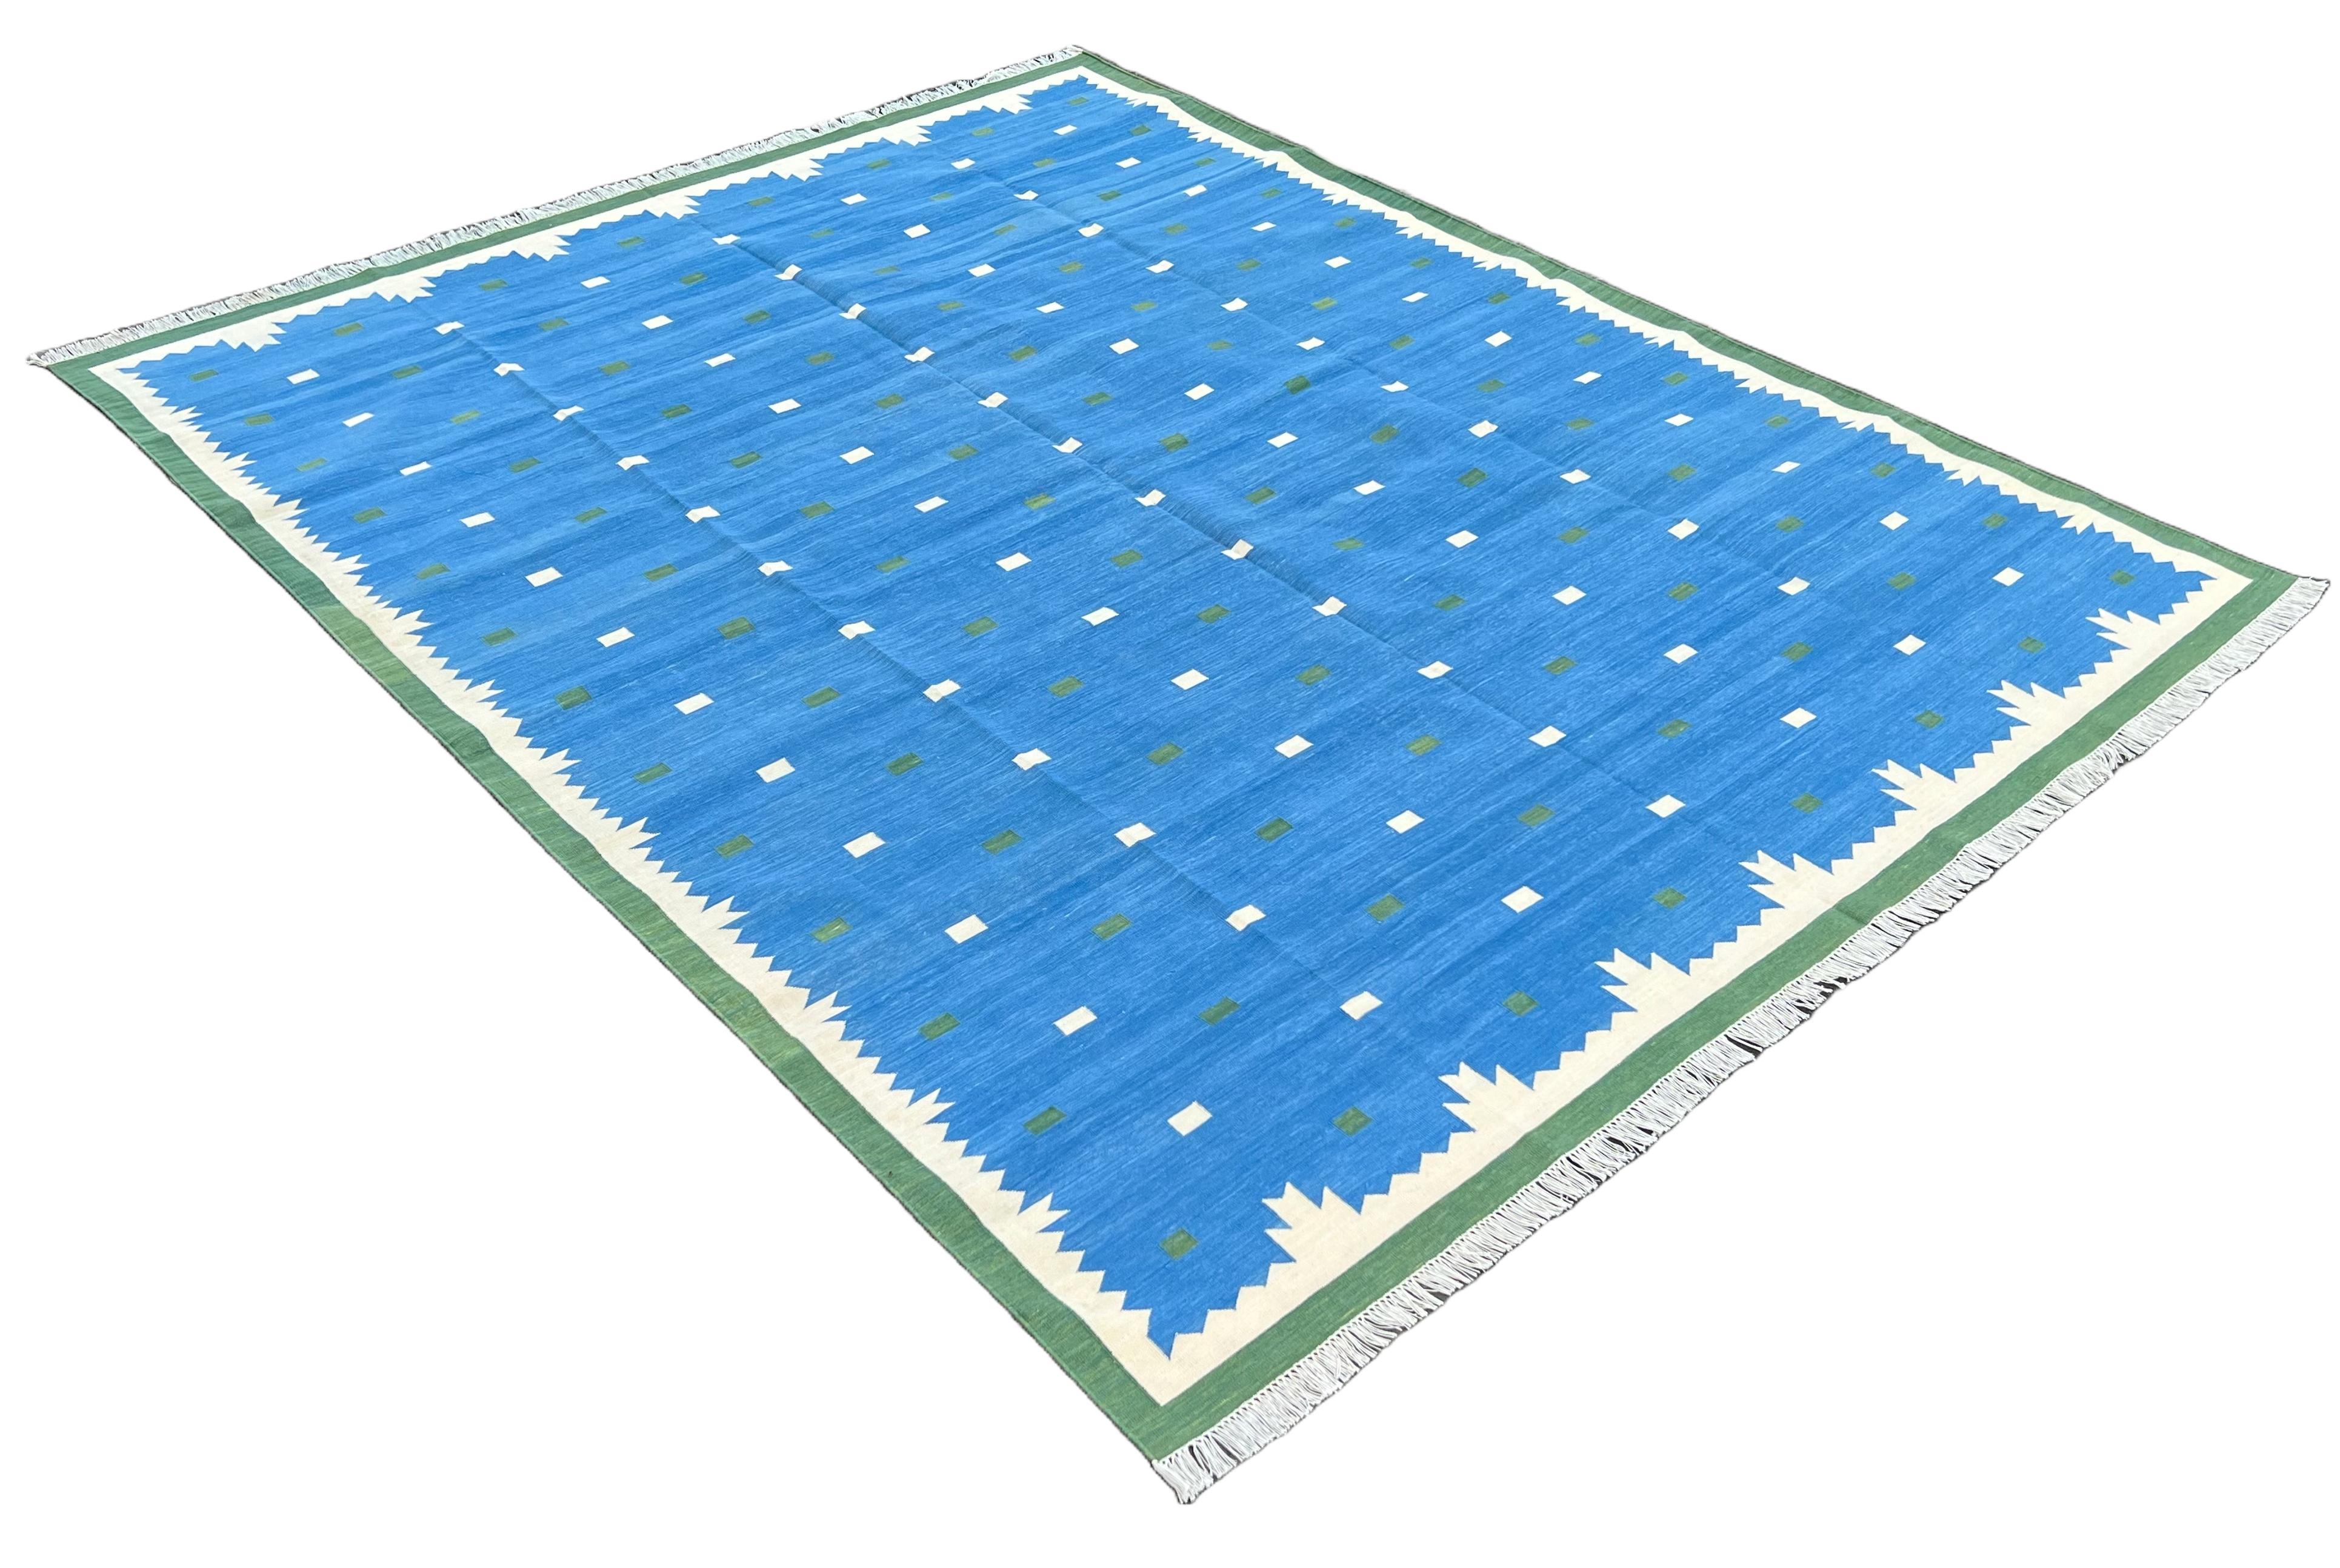 Cotton Vegetable Dyed Reversible Blue, Green And Cream Geometric Patterned Indian Rug - 8'x10'
These special flat-weave dhurries are hand-woven with 15 ply 100% cotton yarn. Due to the special manufacturing techniques used to create our rugs, the